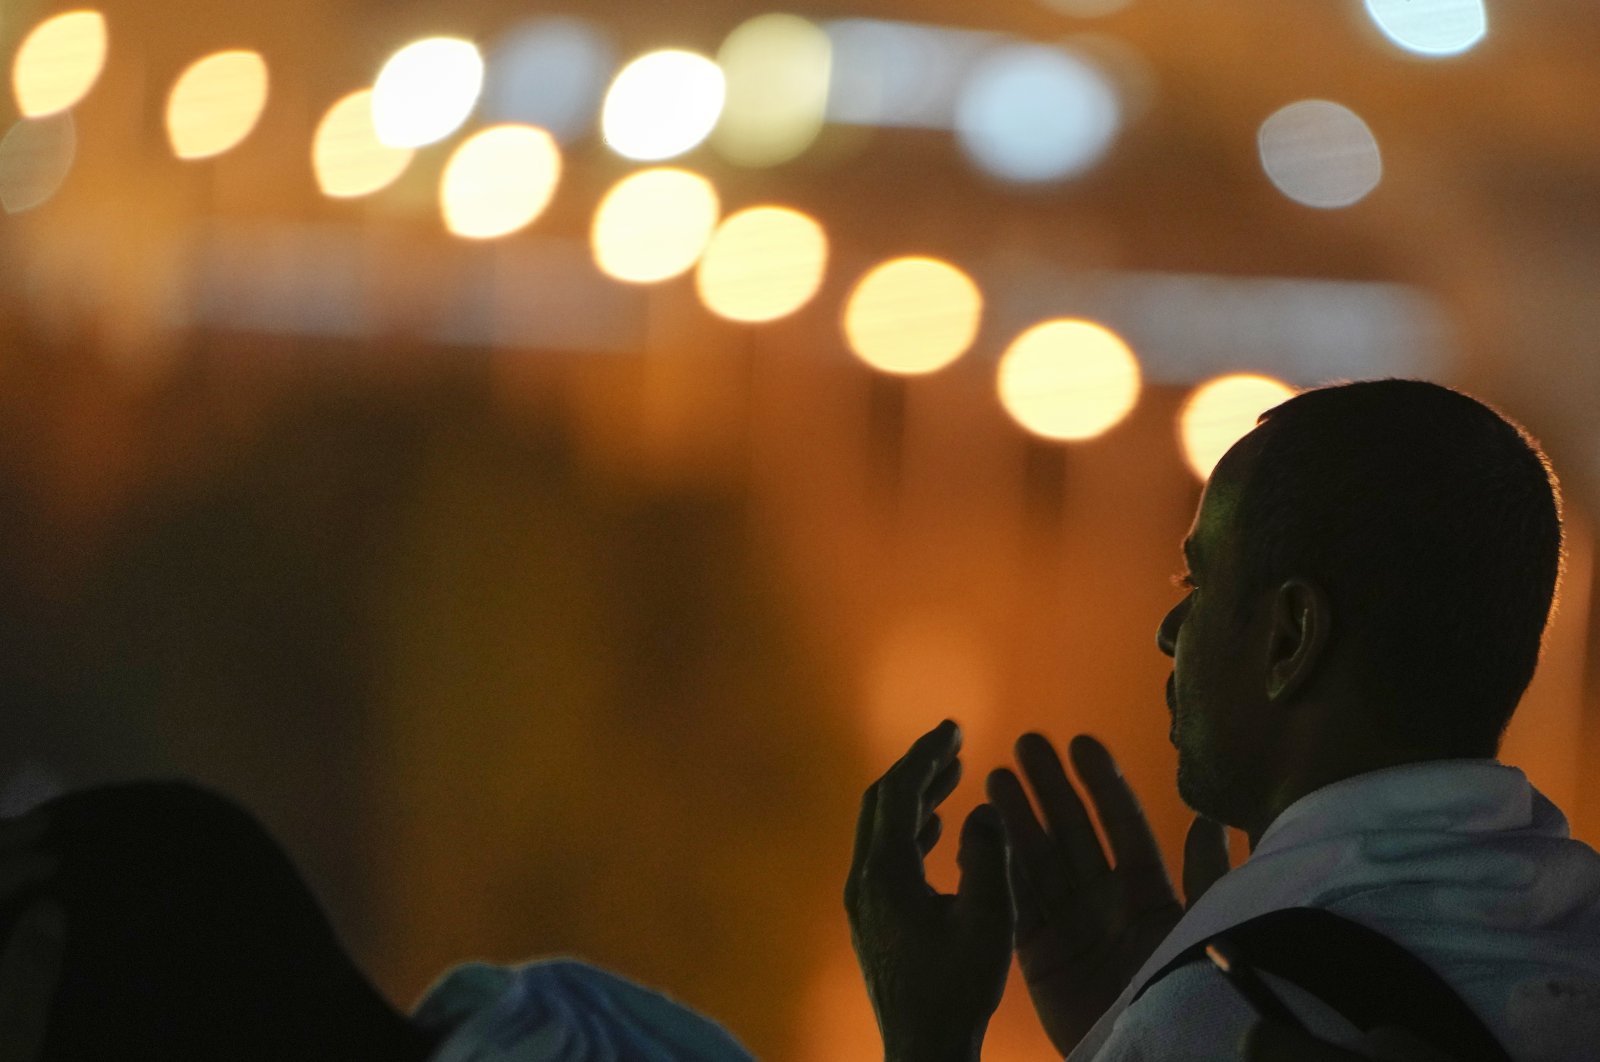 A Muslim pilgrim prays on the rocky hill known as the Mountain of Mercy, on the Plain of Arafat, during the annual Hajj pilgrimage, near the holy city of Mecca, Saudi Arabia, June 27, 2023. (AP Photo)